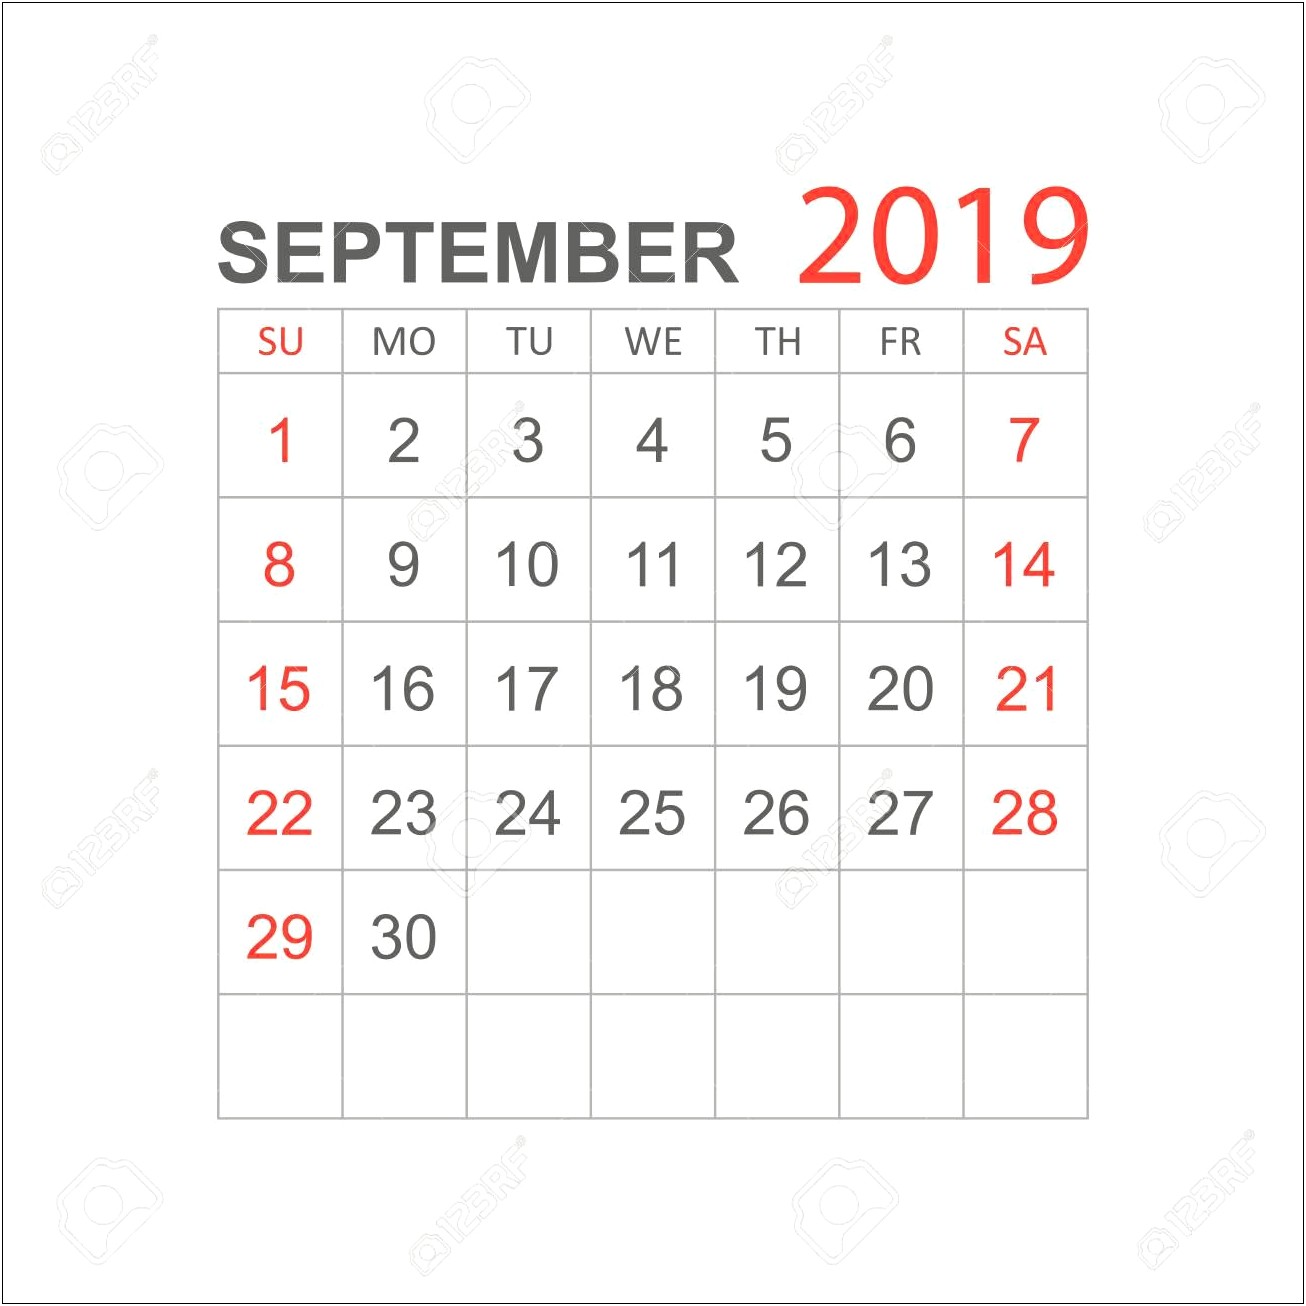 Free Lined Monthly Calendar Template 2019 September